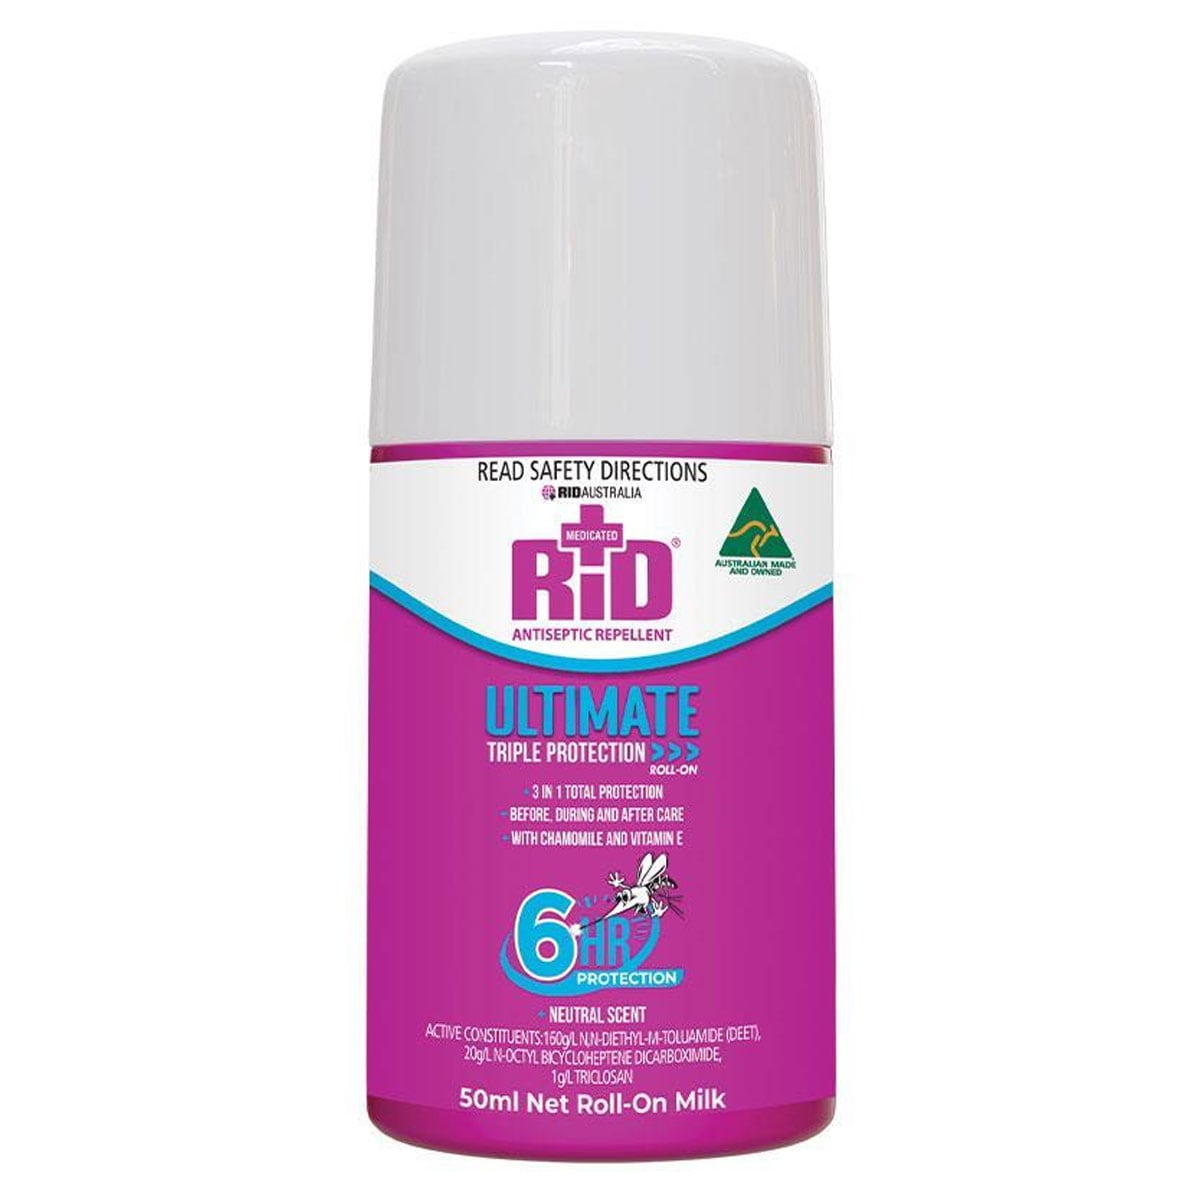 RID Medicated Ultimate Antiseptic Insect Repellent Roll On Milk 50ml